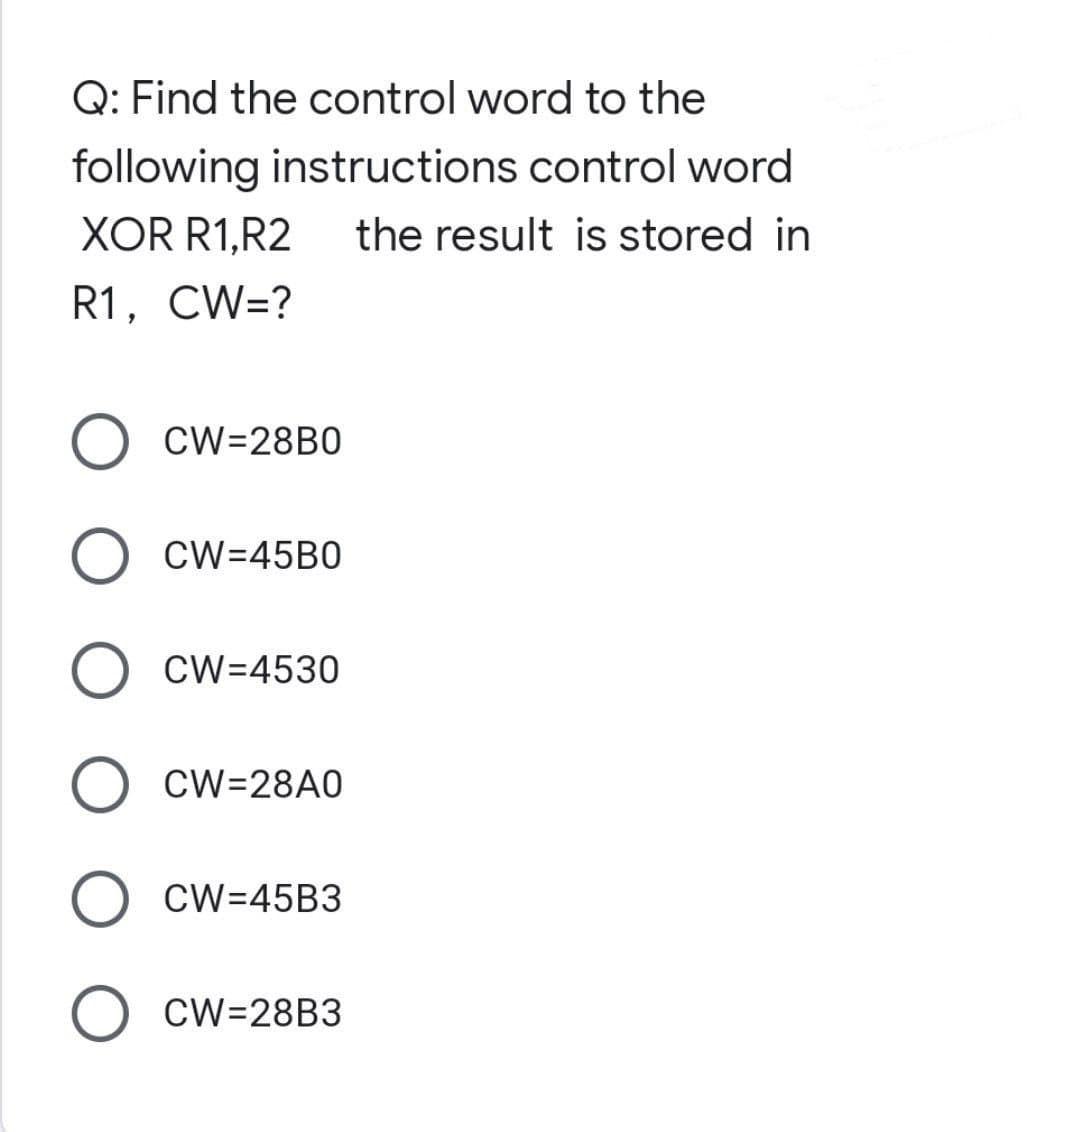 Q: Find the control word to the
following instructions control word
XOR R1,R2 the result is stored in
R1, CW=?
O CW=28B0
O CW=45B0
O CW=4530
O CW=28A0
O CW=45B3
O CW=28B3